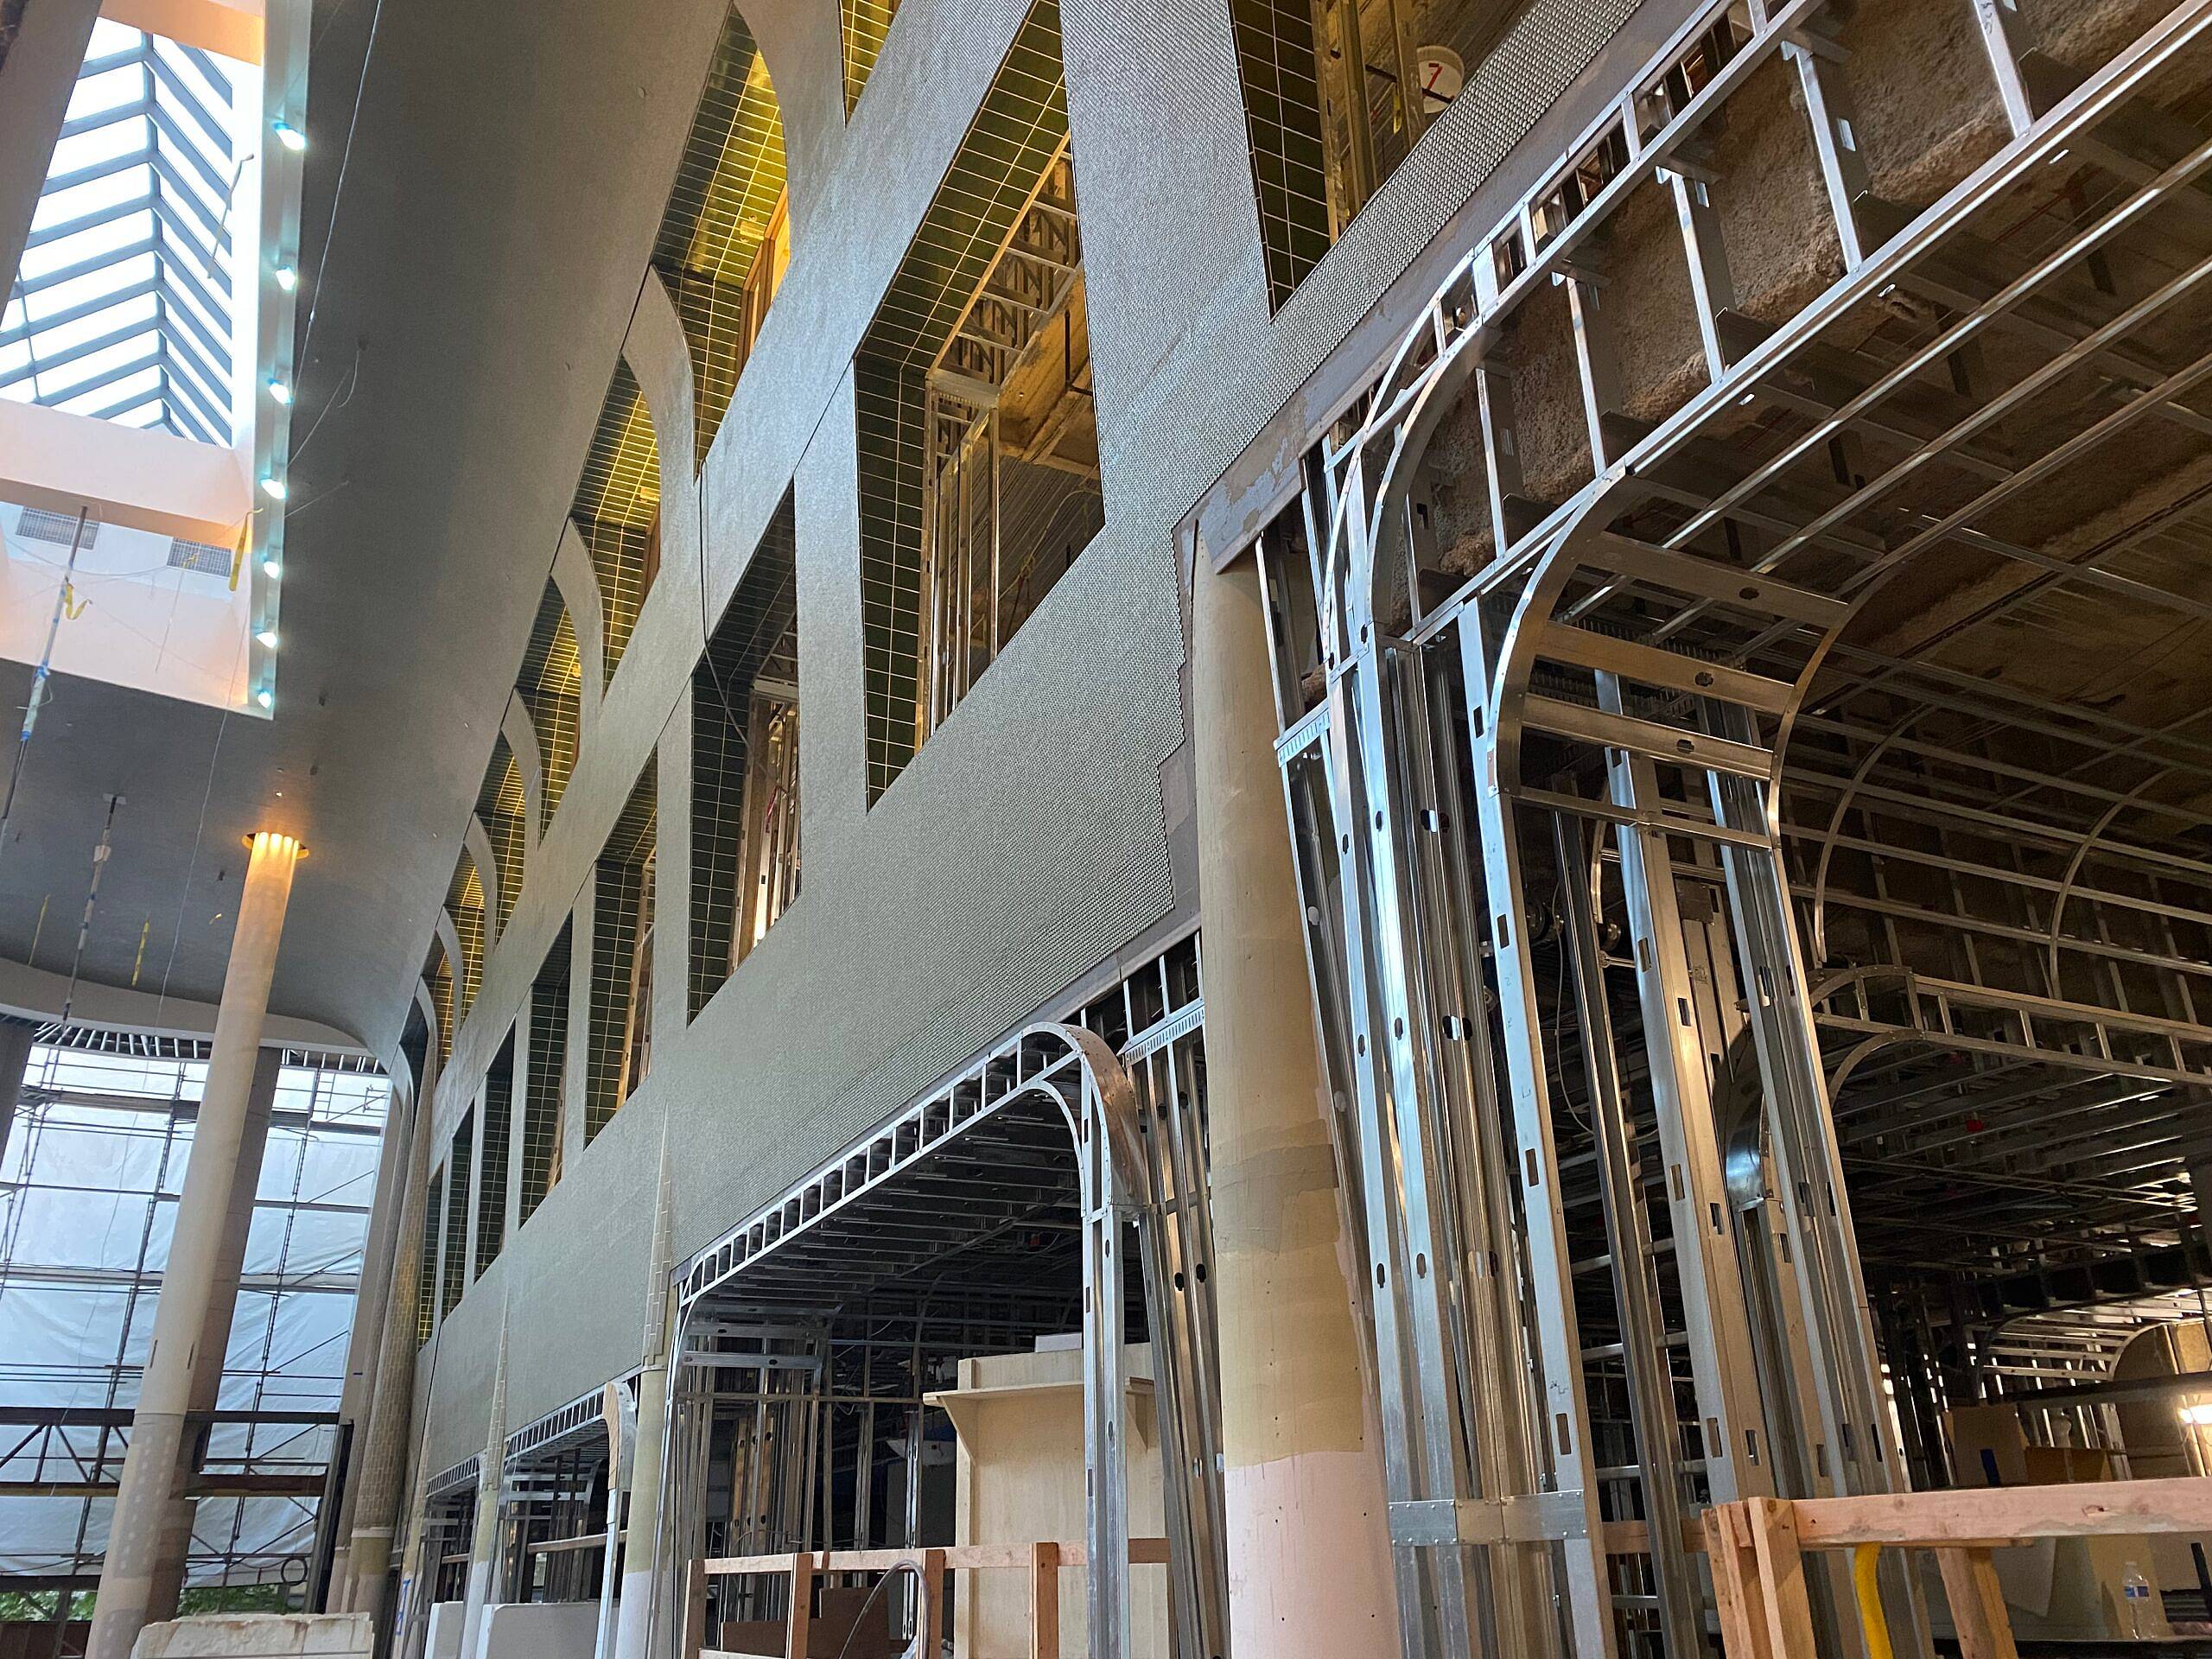 The US Bank’s project design included incredibly diverse metal stud framing with very little repetitive designs. Walls and ceilings incorporated curves, arches and portals that integrated with specialized, imported finishes.
